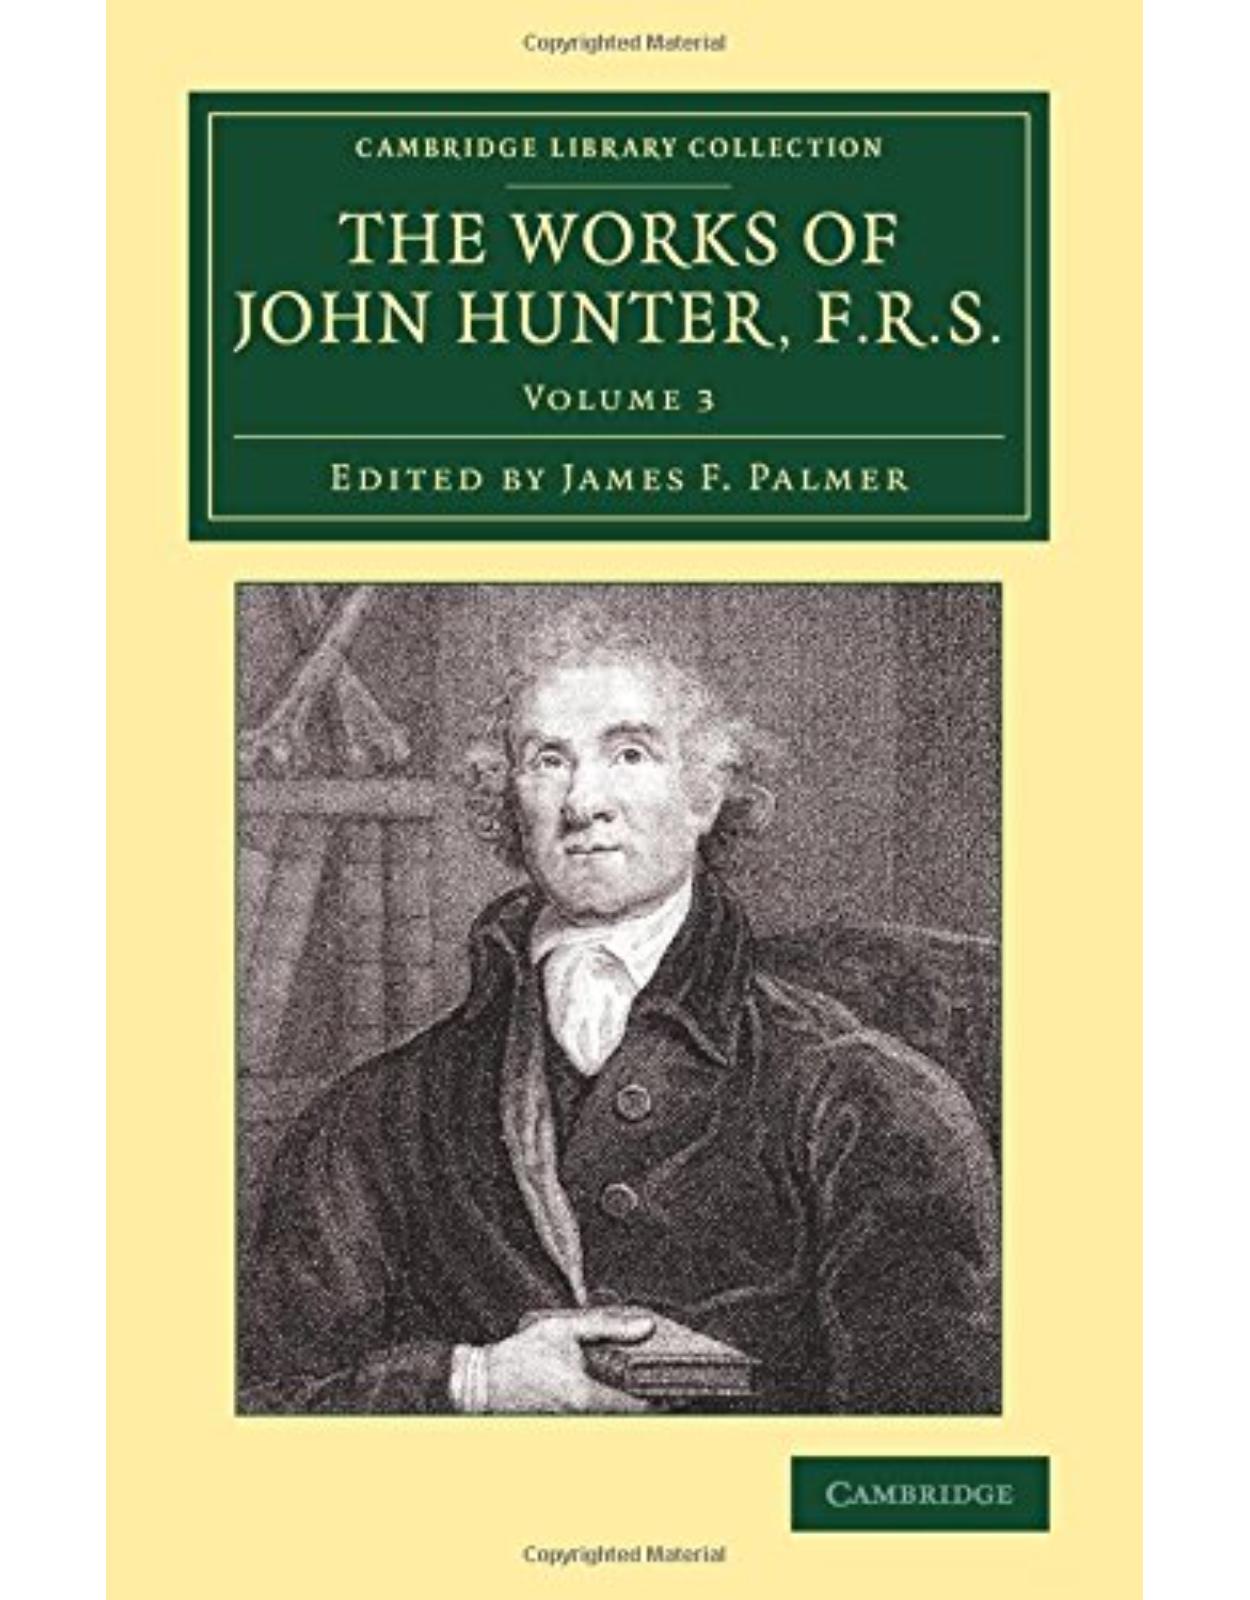 The Works of John Hunter, F.R.S. 4 Volume Set: The Works of John Hunter, F.R.S.: With Notes: Volume 3 (Cambridge Library Collection - History of Medicine)